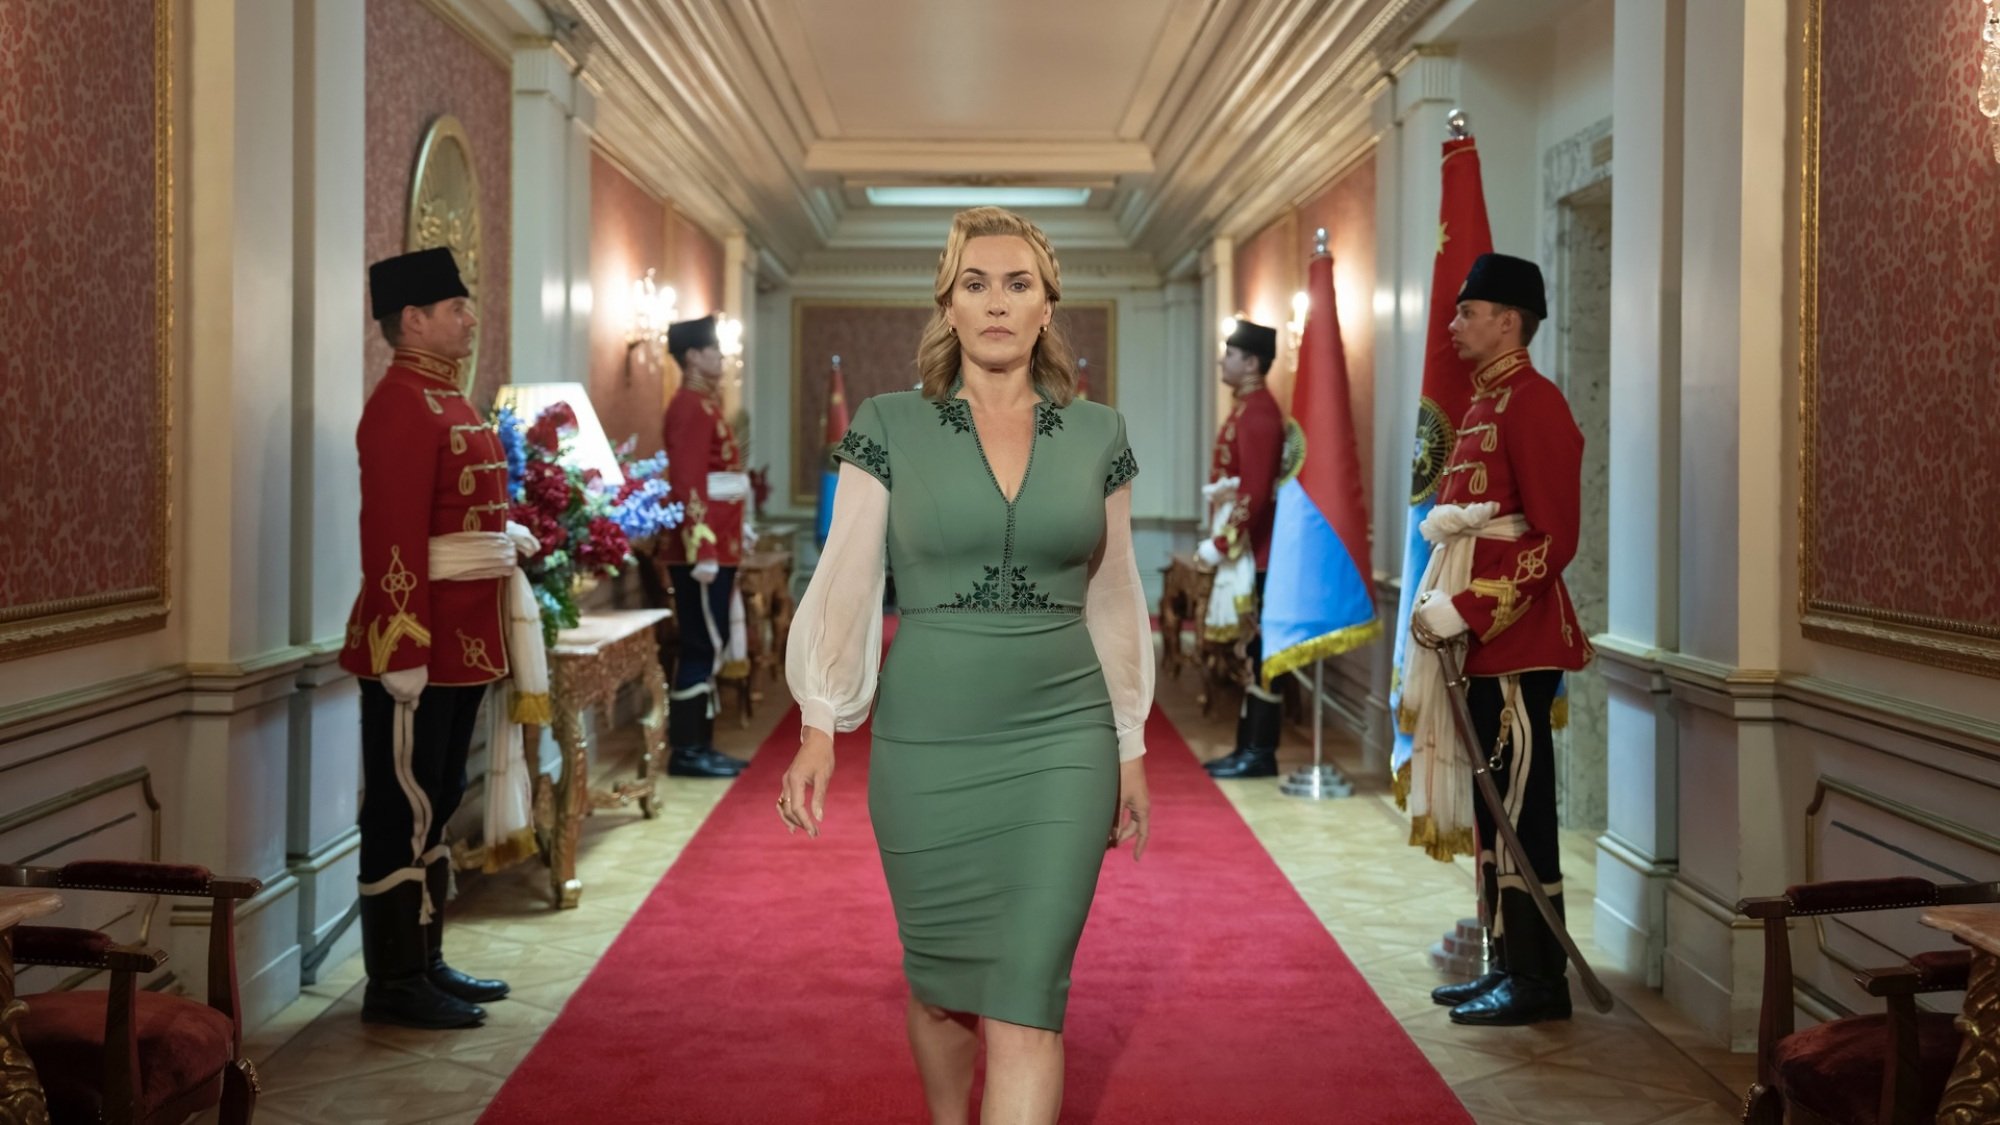 A woman in a green dress with puffy white sleeves walks down a hallway lined with soldiers in red uniforms.